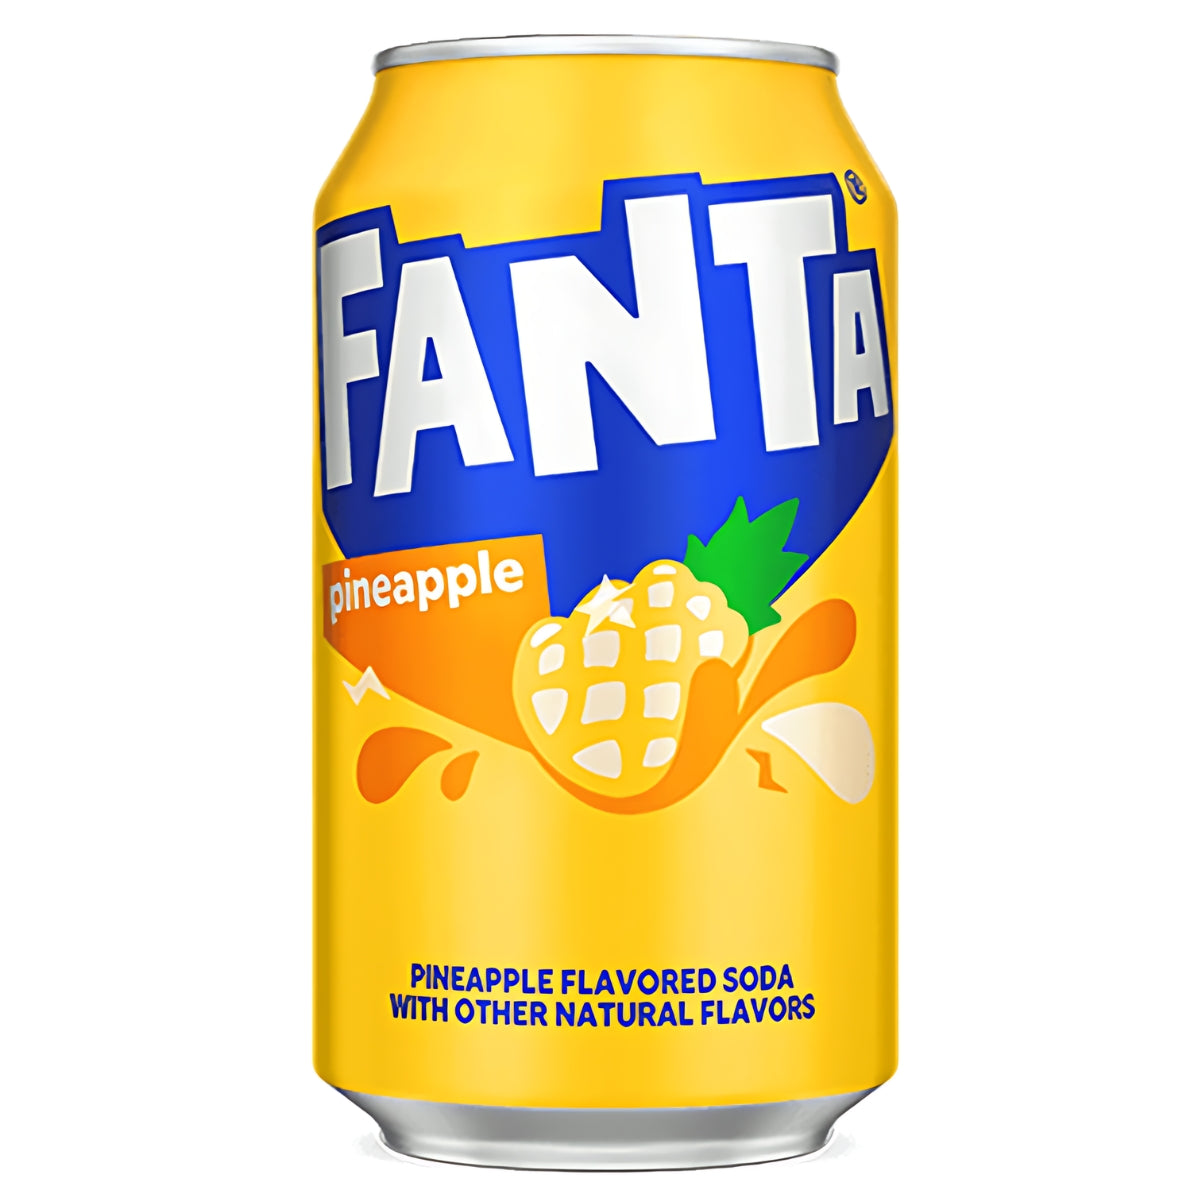 A can of refreshing Fanta - Pineapple Can (America) - 355ml with a yellow background and the text "pineapple" on the can, offering a delightful tropical flavor.